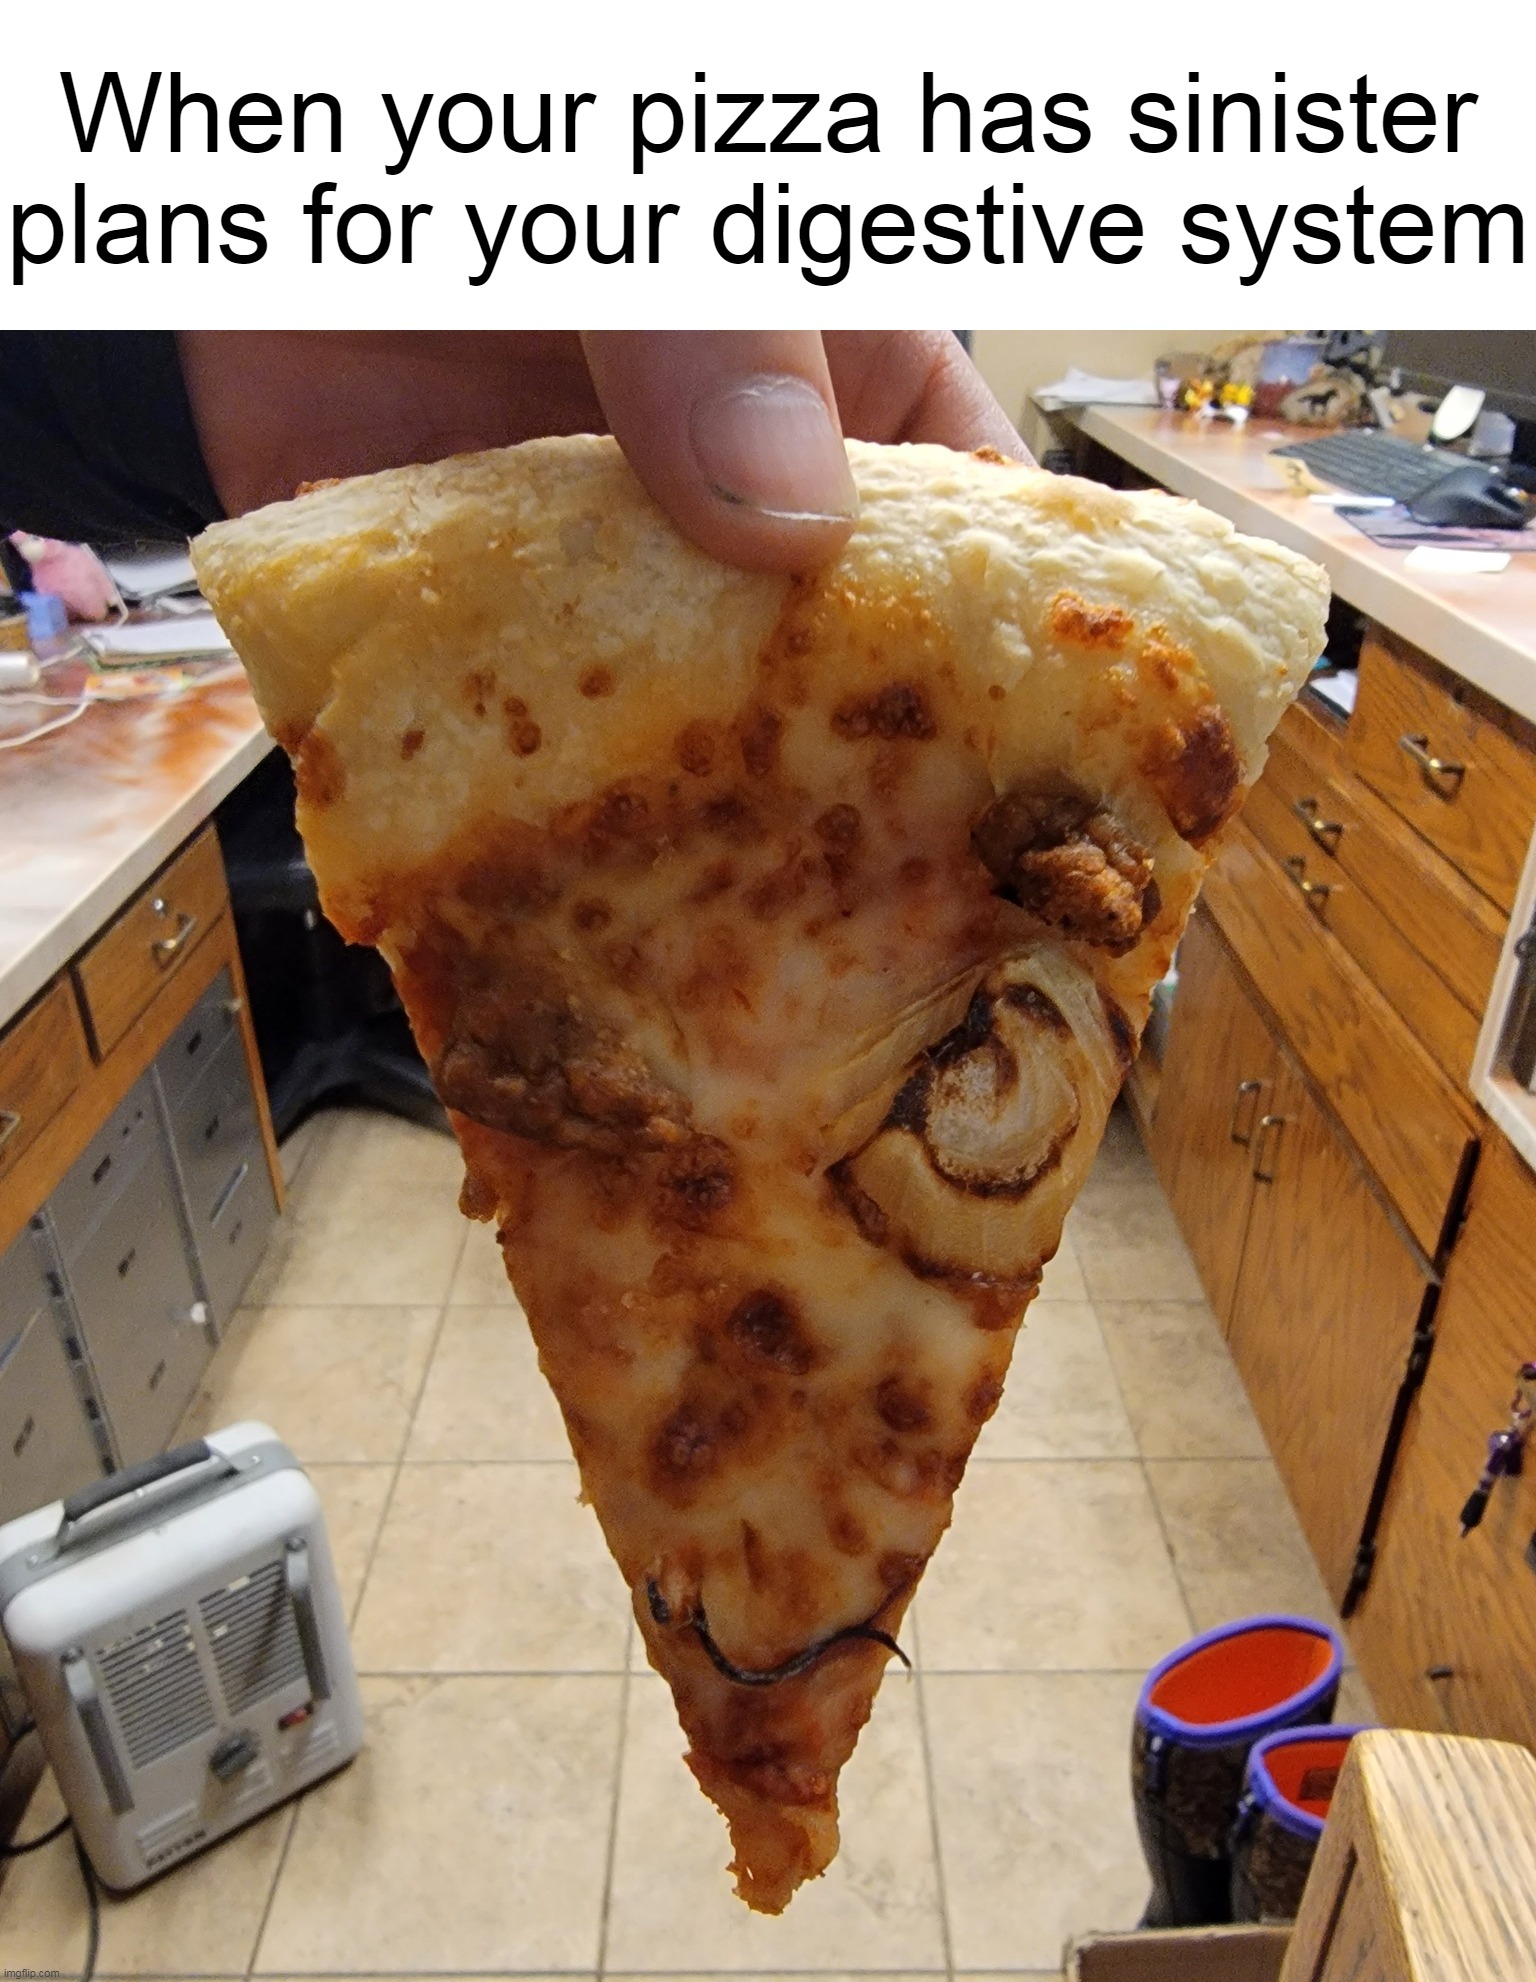 When your pizza has sinister plans for your digestive system | image tagged in meme,memes,humor | made w/ Imgflip meme maker